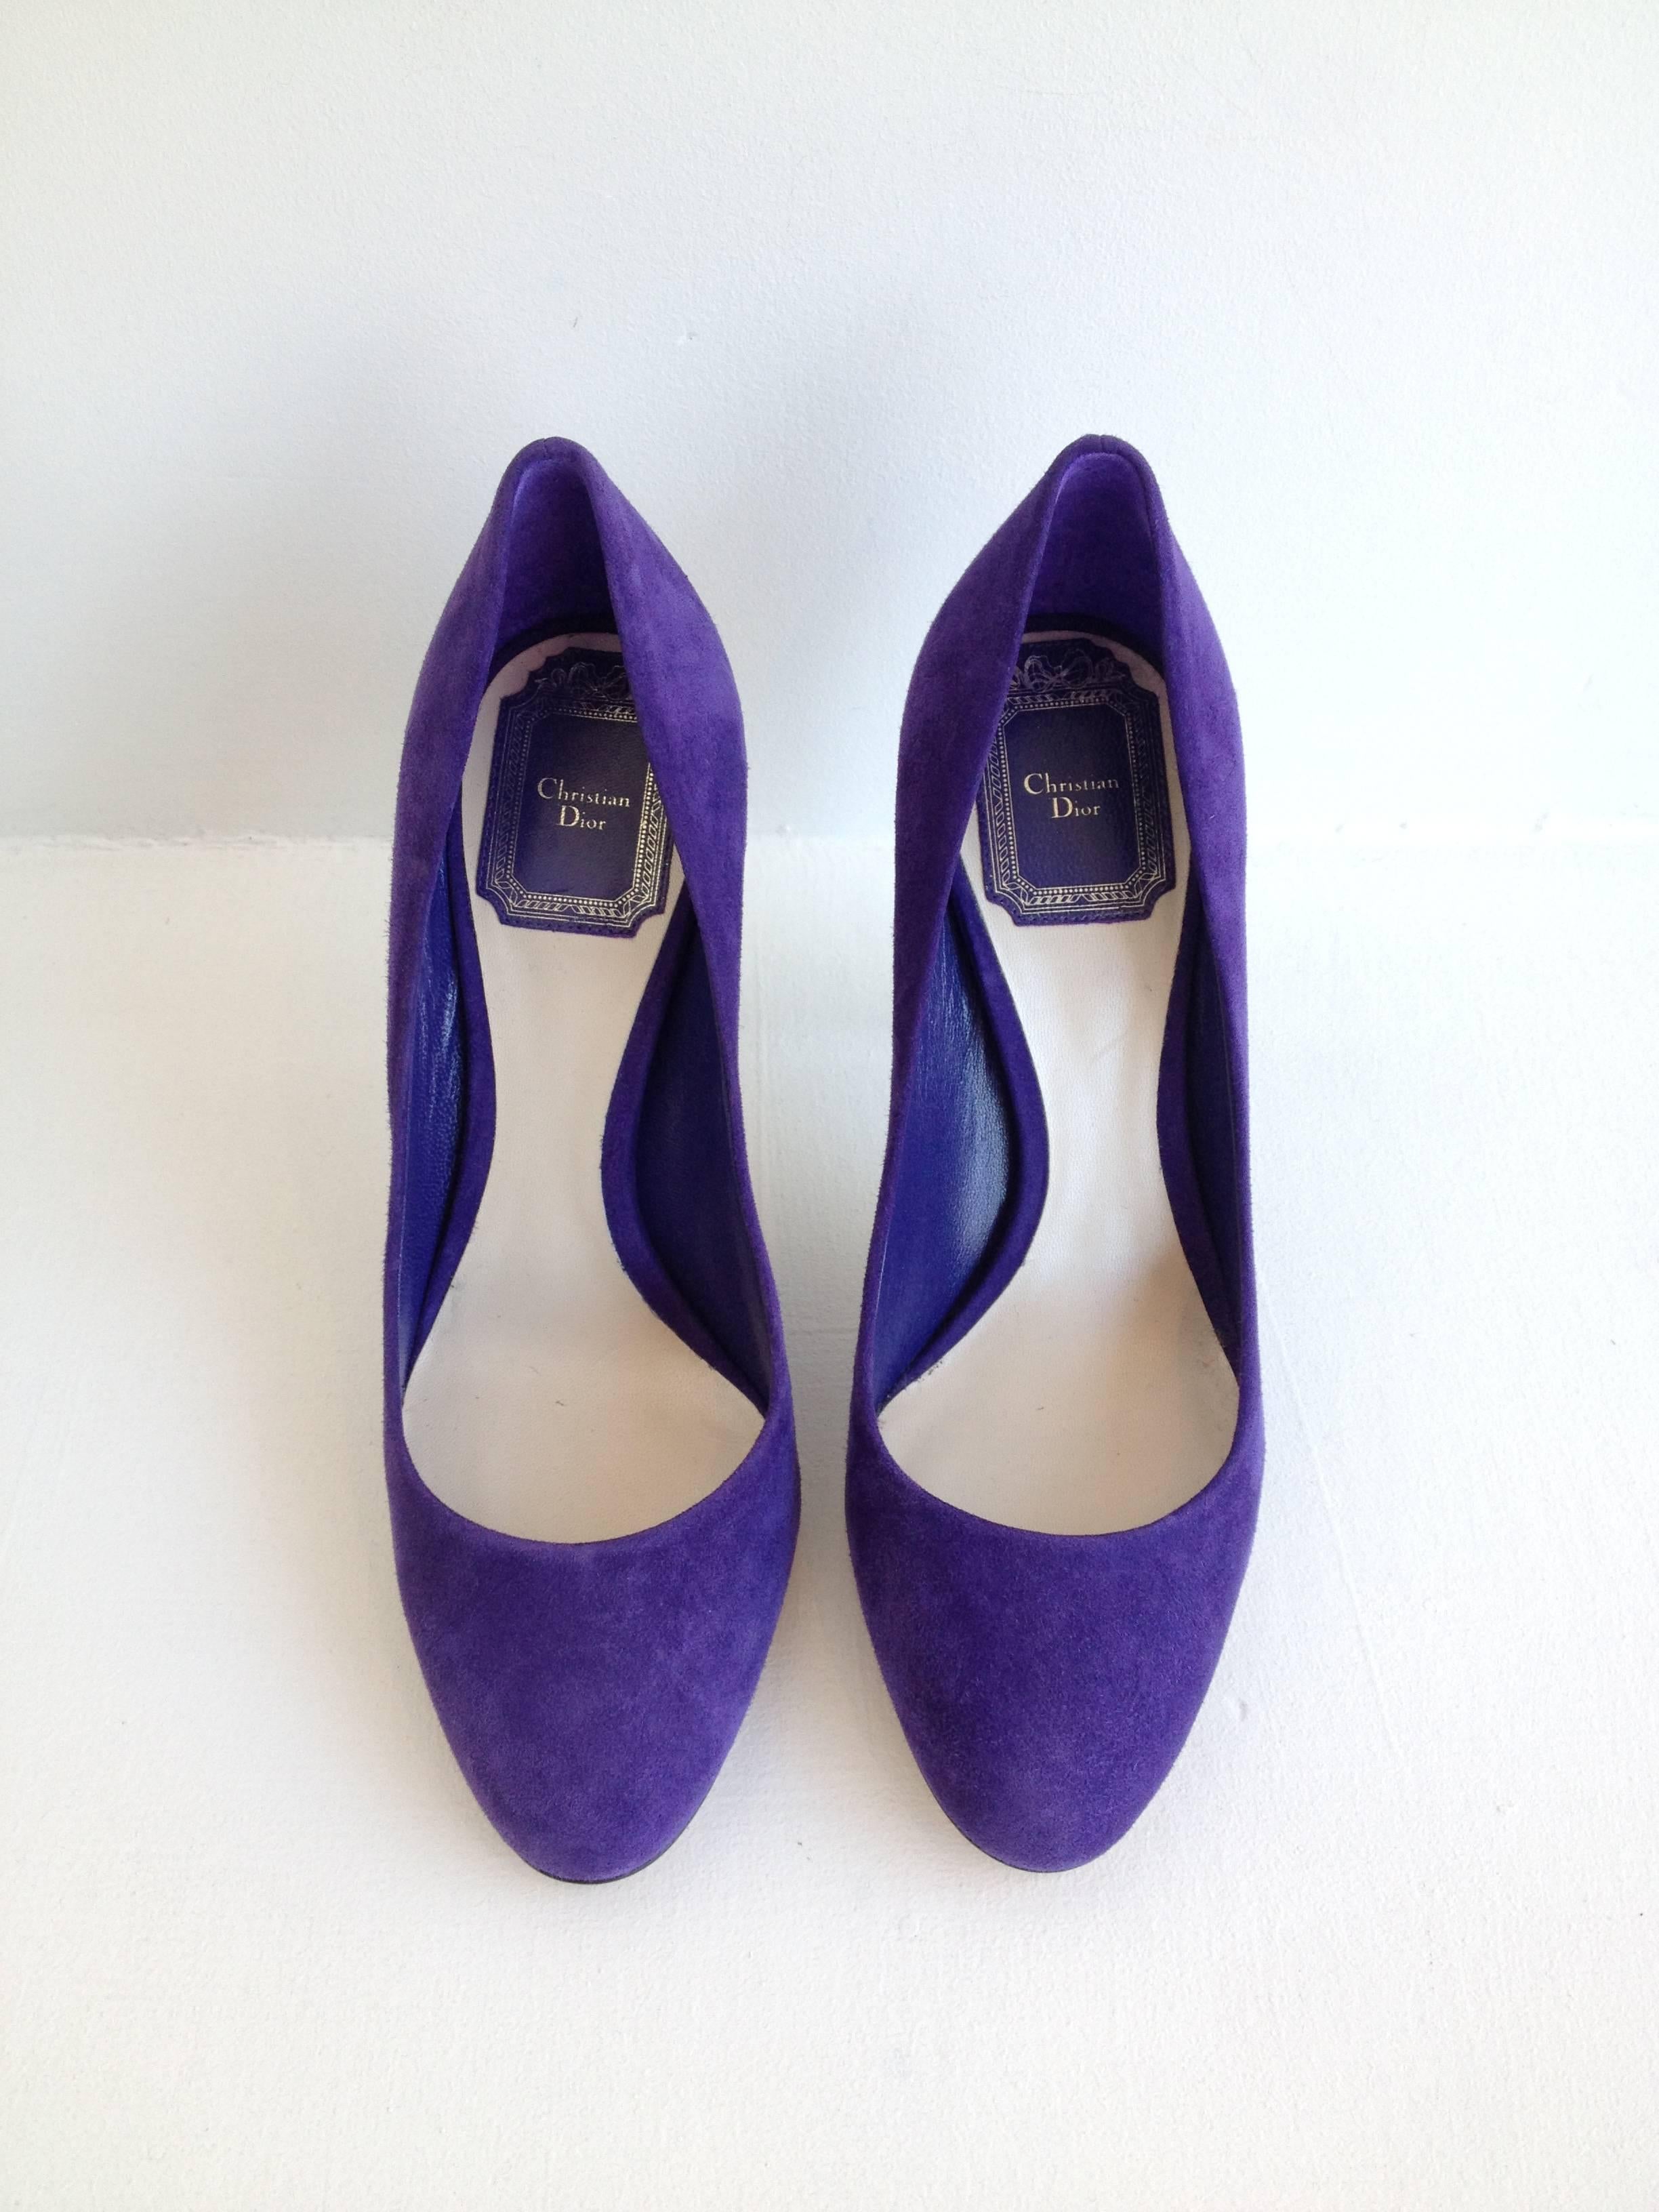 Feminine but bold, these pumps by Christian Dior are the perfect antidote to wardrobe boredom. The shape is simple and classic and easy to pair with anything from summer dresses to jeans and a t-shirt, while the punchy purple suede is a lush and